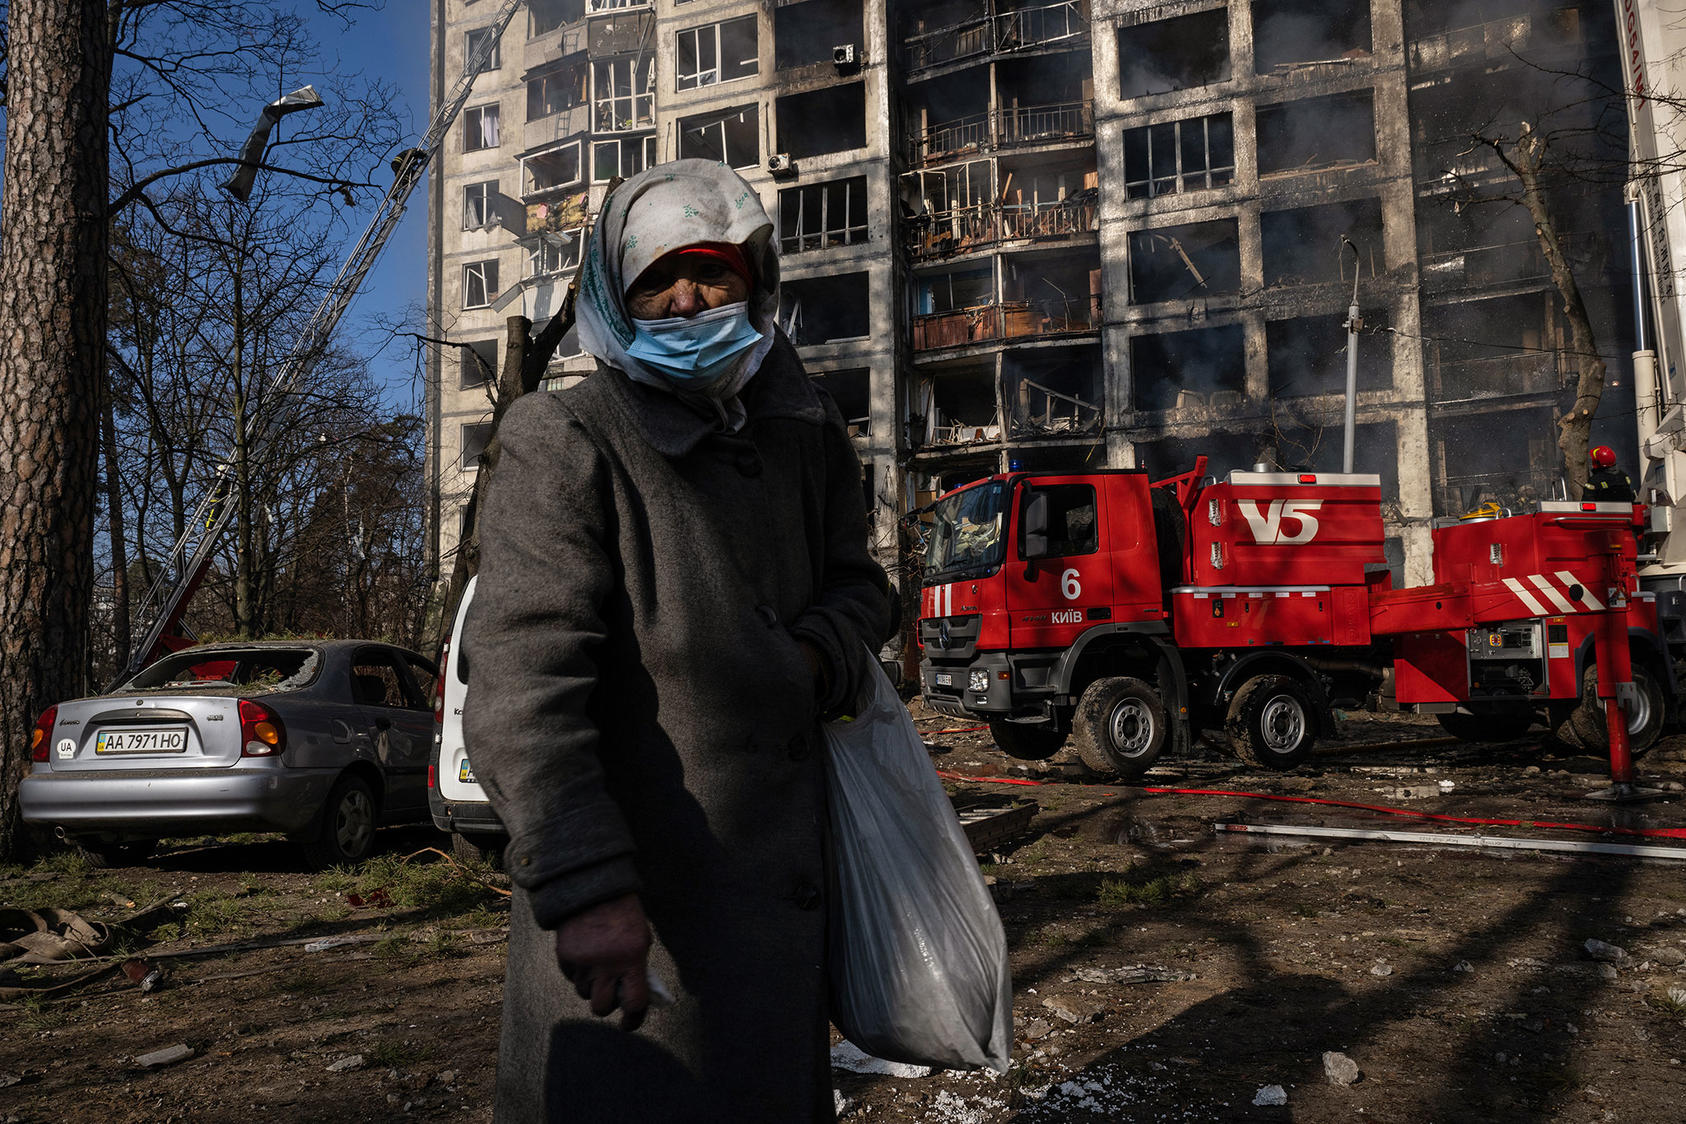 A woman in Kyiv passes crews battling flames in apartments rocketed by Russia’s army. Ukrainians’ furious self-defense may be forcing Vladimir Putin to rethink his options. But he will concede only what he is forced to. (Lynsey Addario/The New York Times)